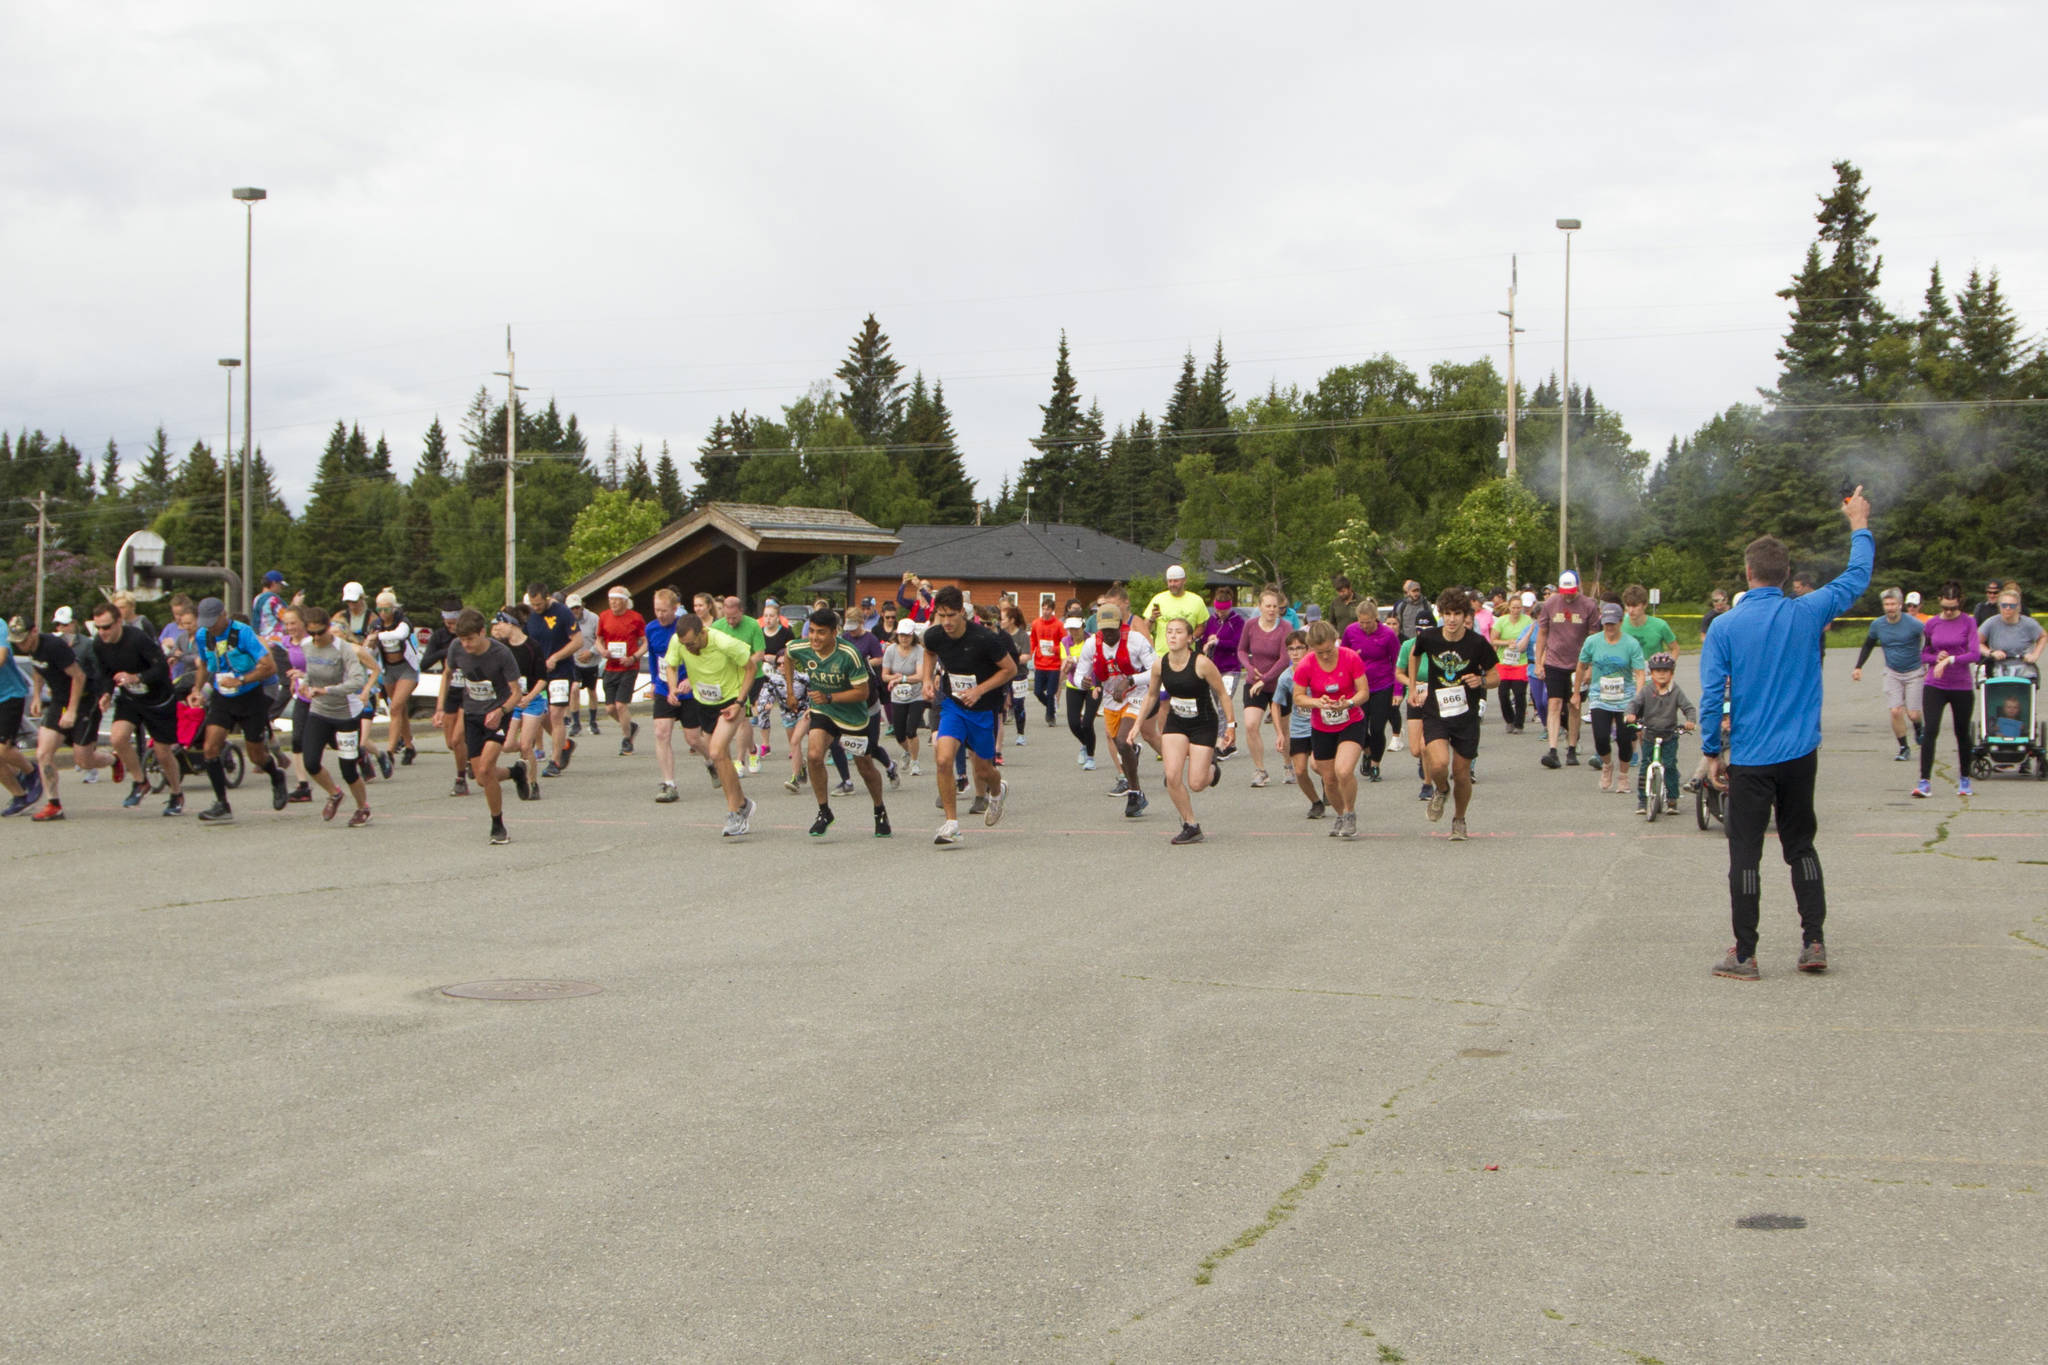 More than 140 runners participated in the 10K to the Bay run on Saturday, June 26. The race began at Homer High School and finished at Land's End on the Spit. (Photo by Sarah Knapp/Homer News)